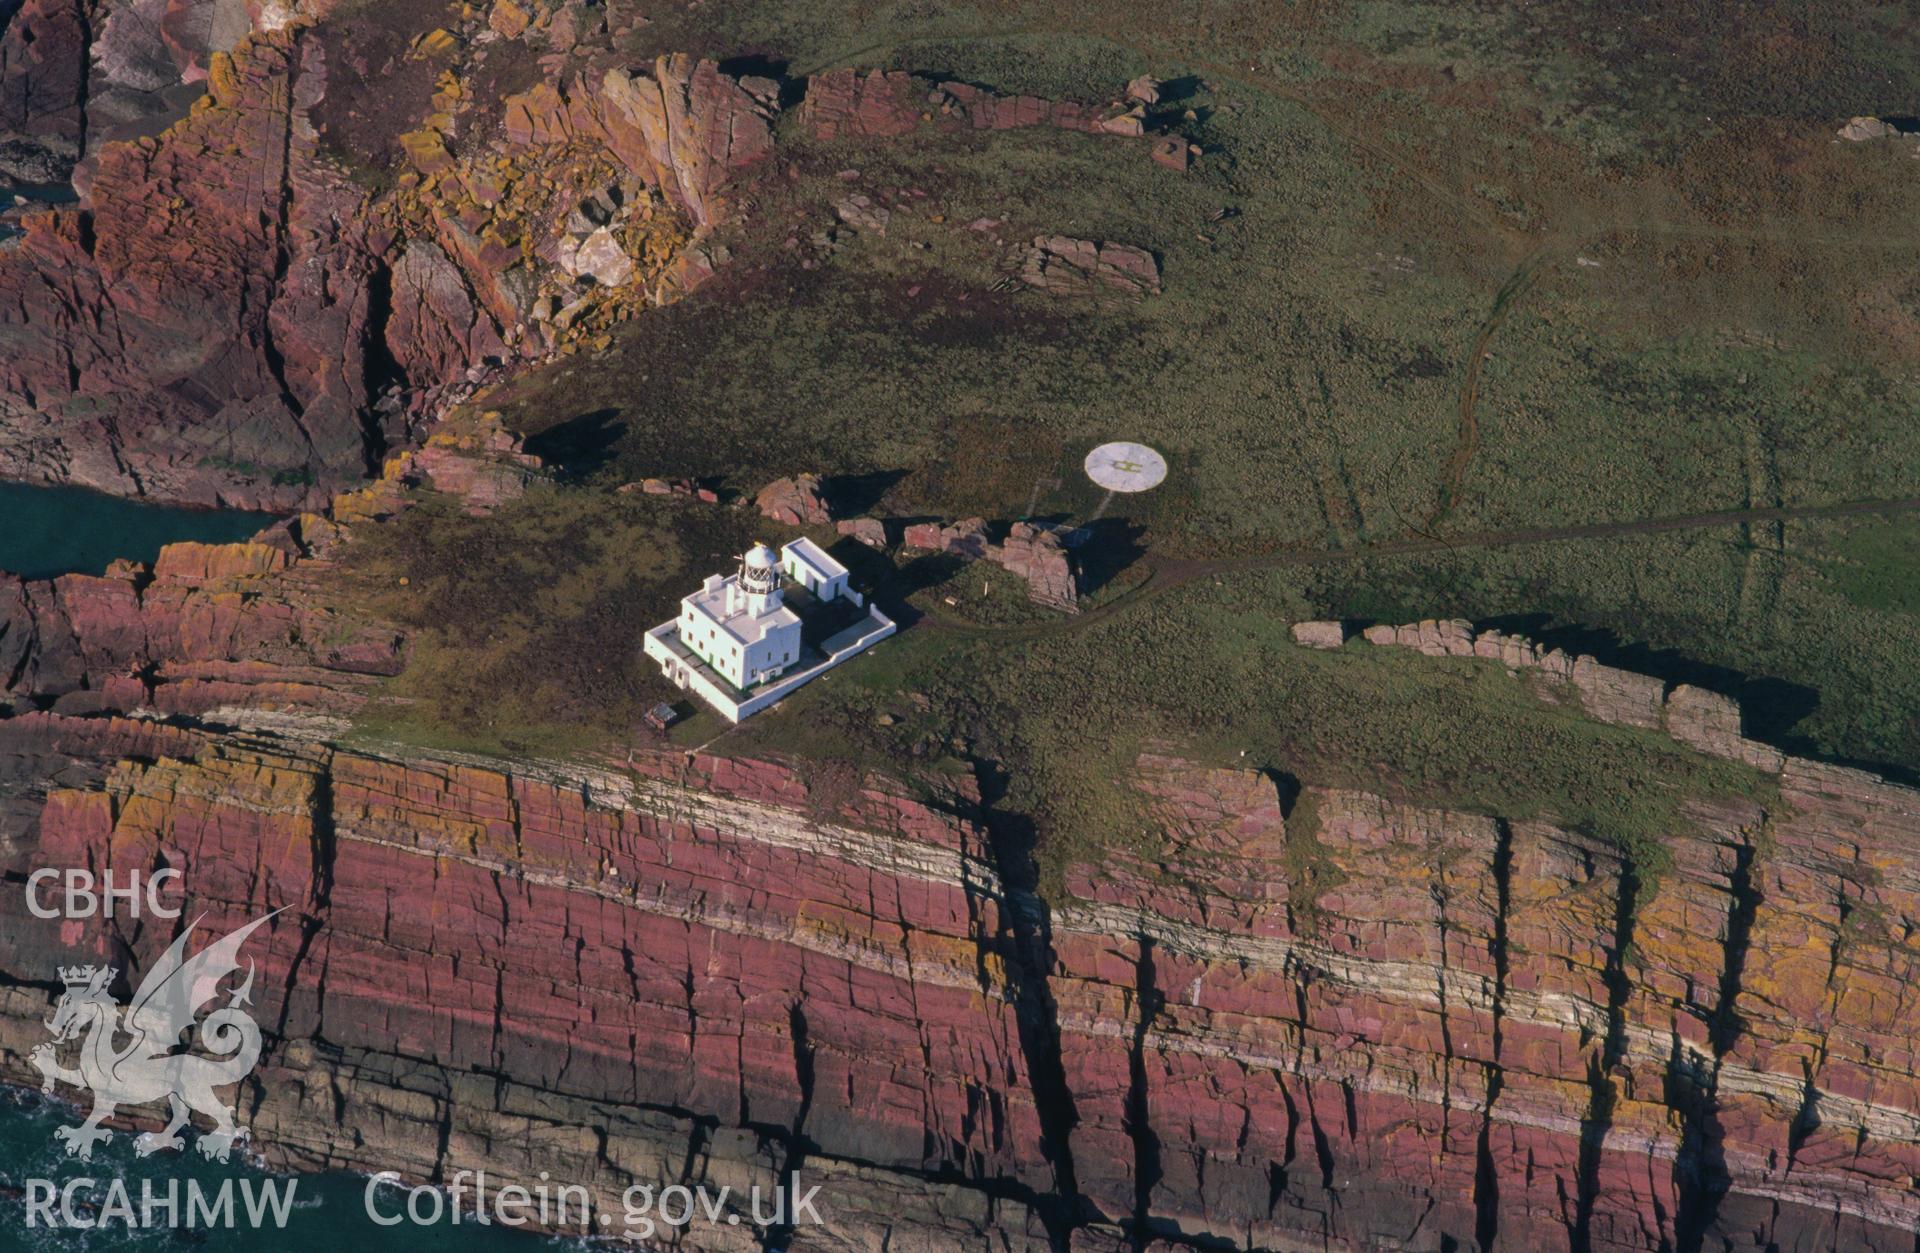 Slide of RCAHMW colour oblique aerial photograph of Skokholm Island Lighthouse, taken by C.R. Musson, 23/2/1993.